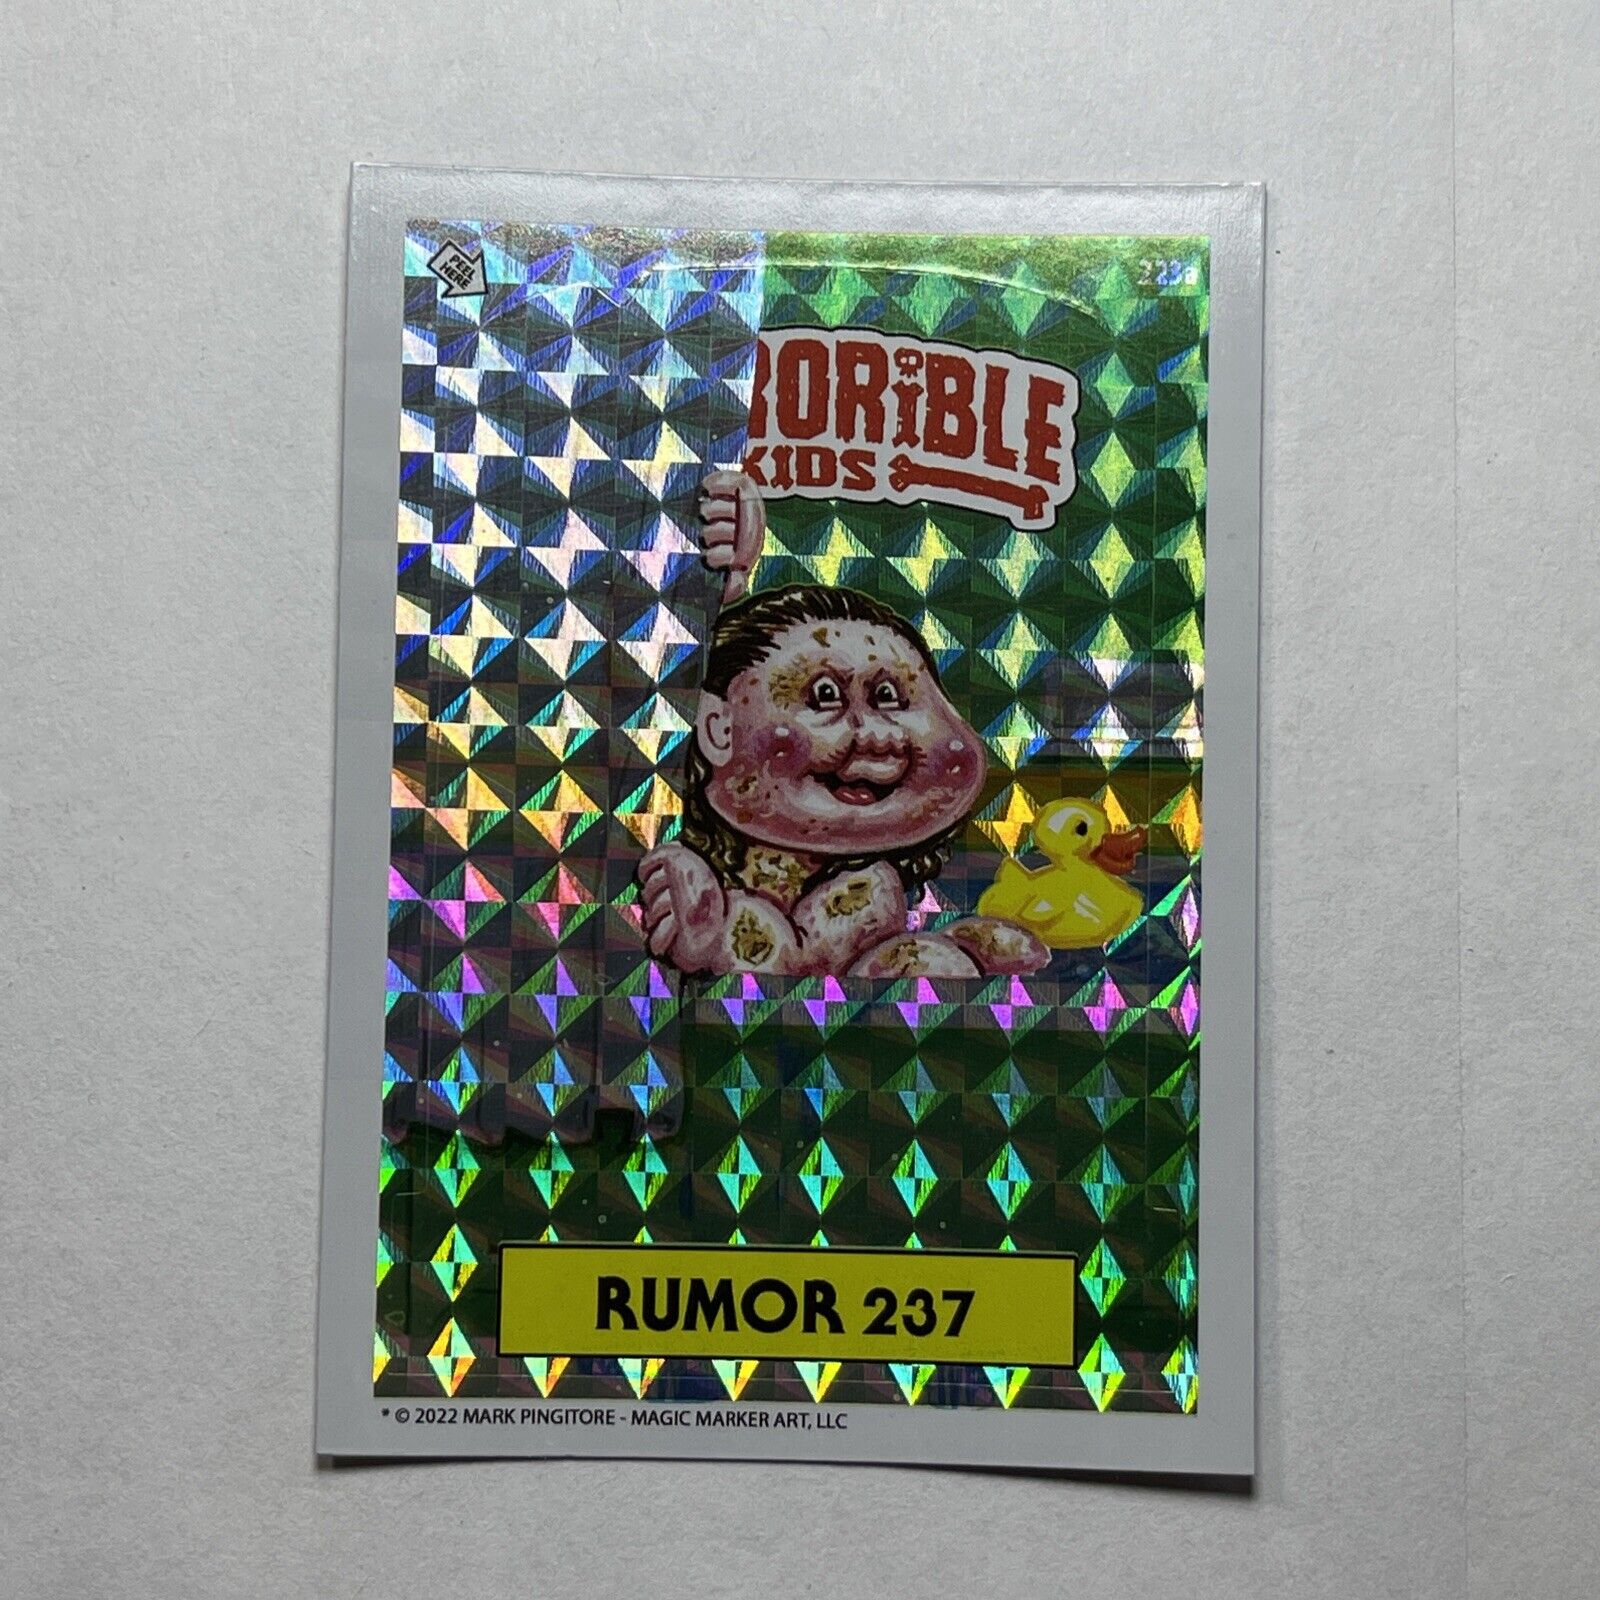 2022 Horrorible Kids Stickers All New Series 7 RUMOR 237 Foil Card #223a